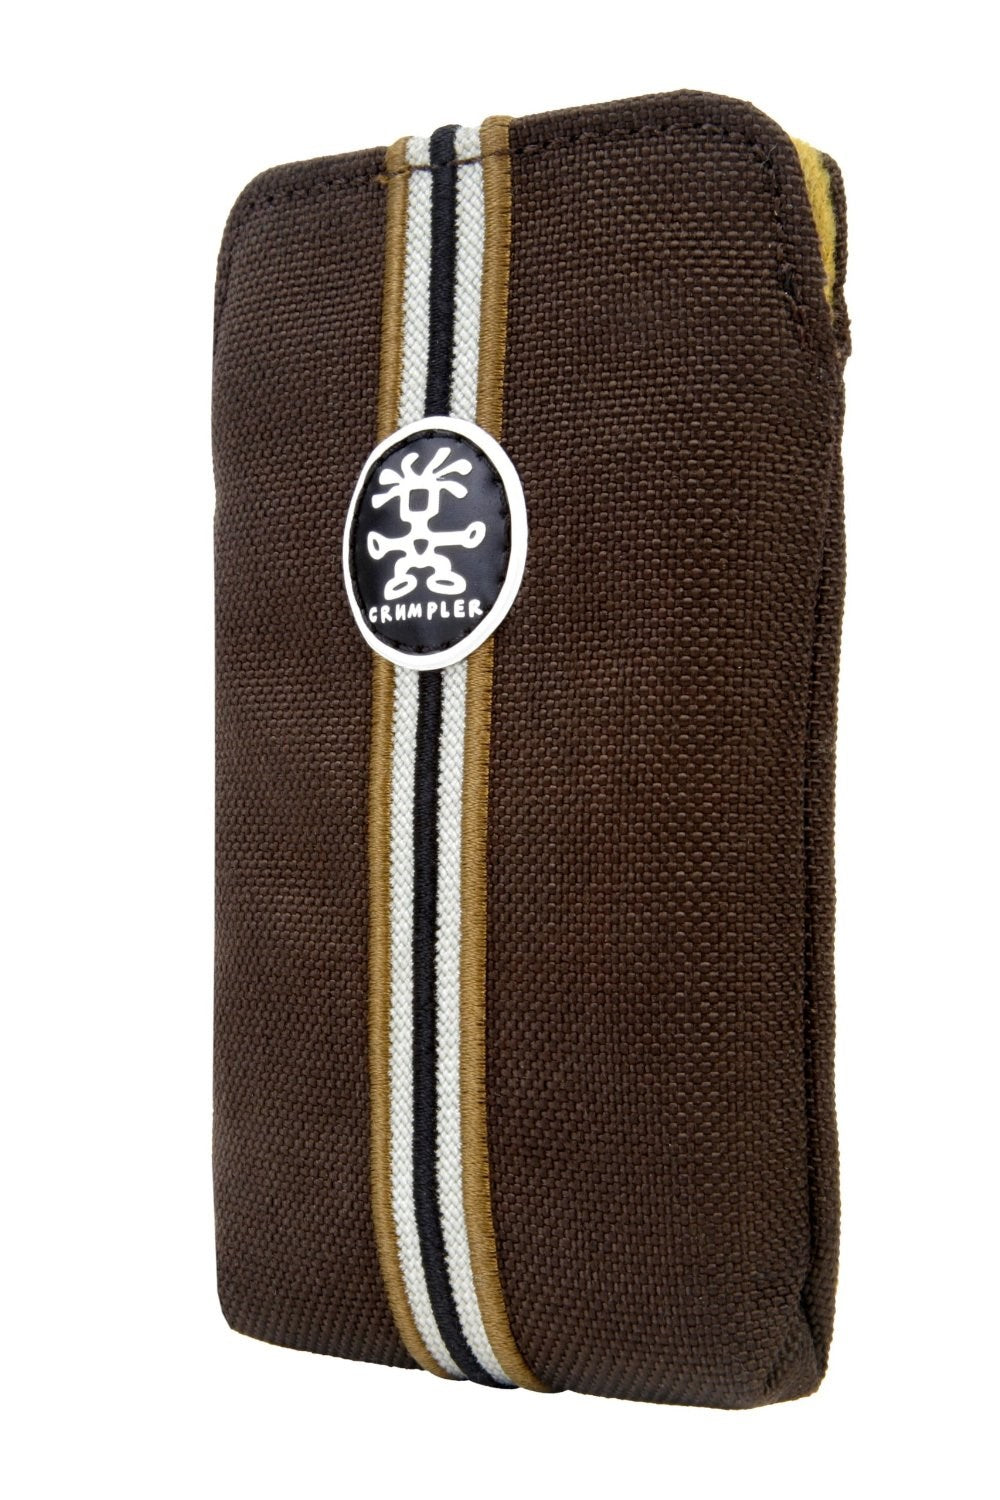 Product Image of Crumpler The Culchie Pouch case for Apple iPhone 3, 4 & 4S - iPod Touch espresso Brown